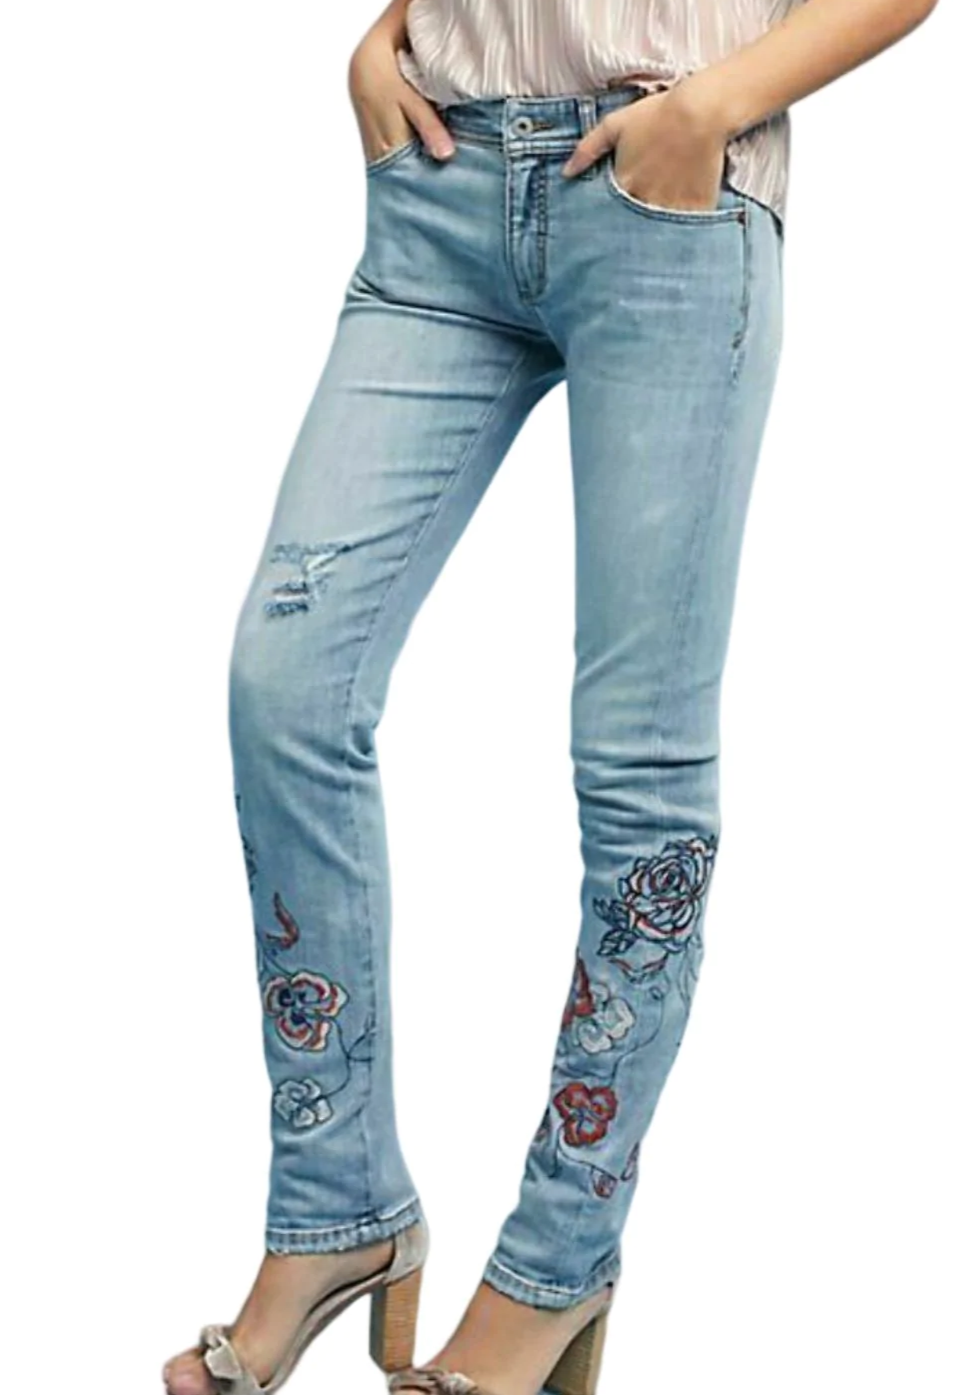 Anthropologie Jeans Womens 25 Blue Slim Boyfriend Mid-Rise Floral Embroidered Pilcro